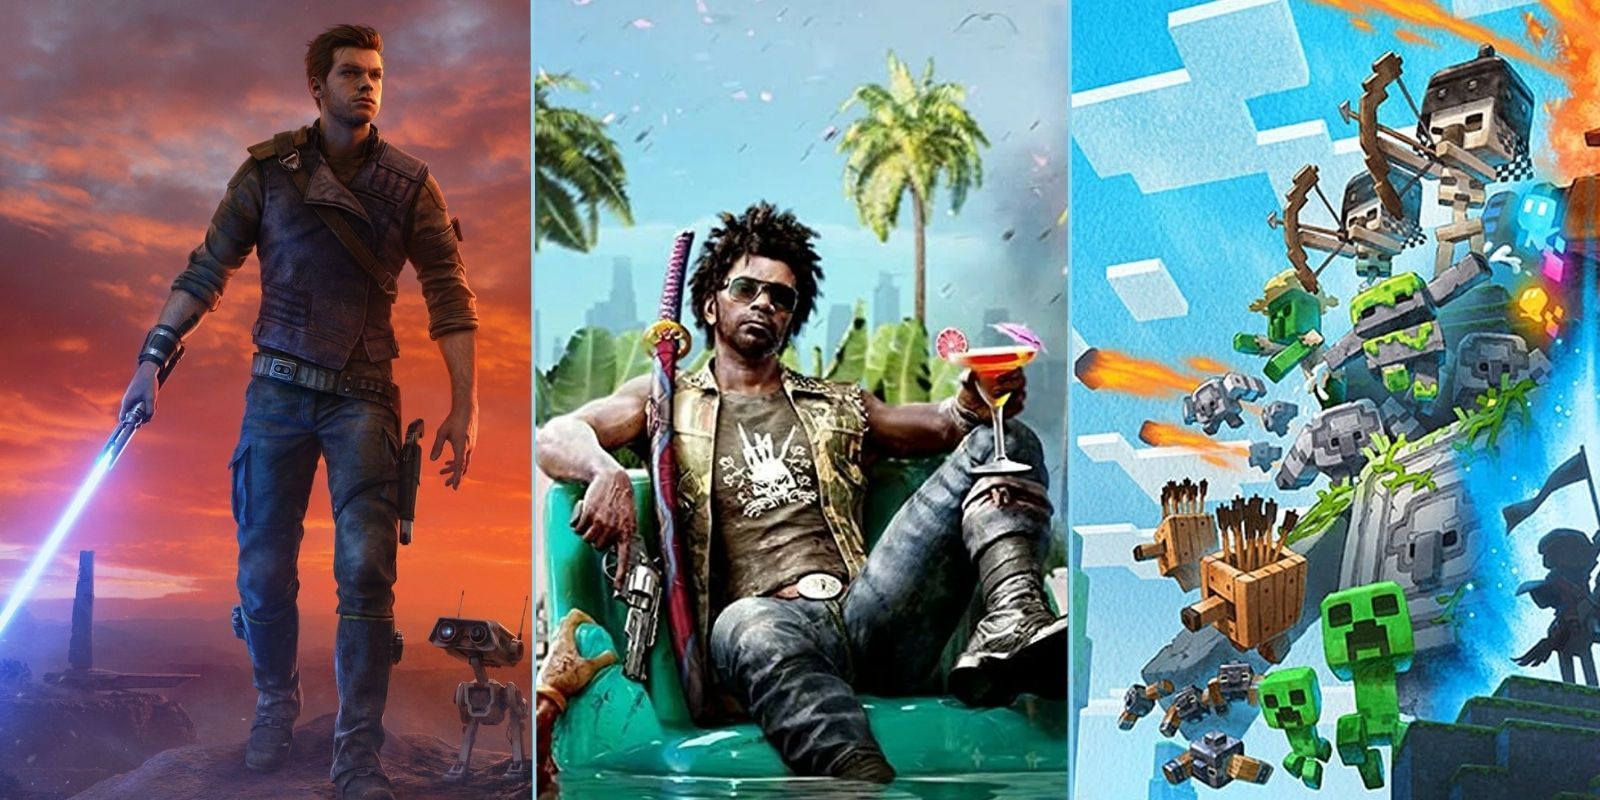 April 2023 Video Game Releases, featuring the Star Wars Jedi: Survivor, Dead Island 2, and Minecraft Legends covers